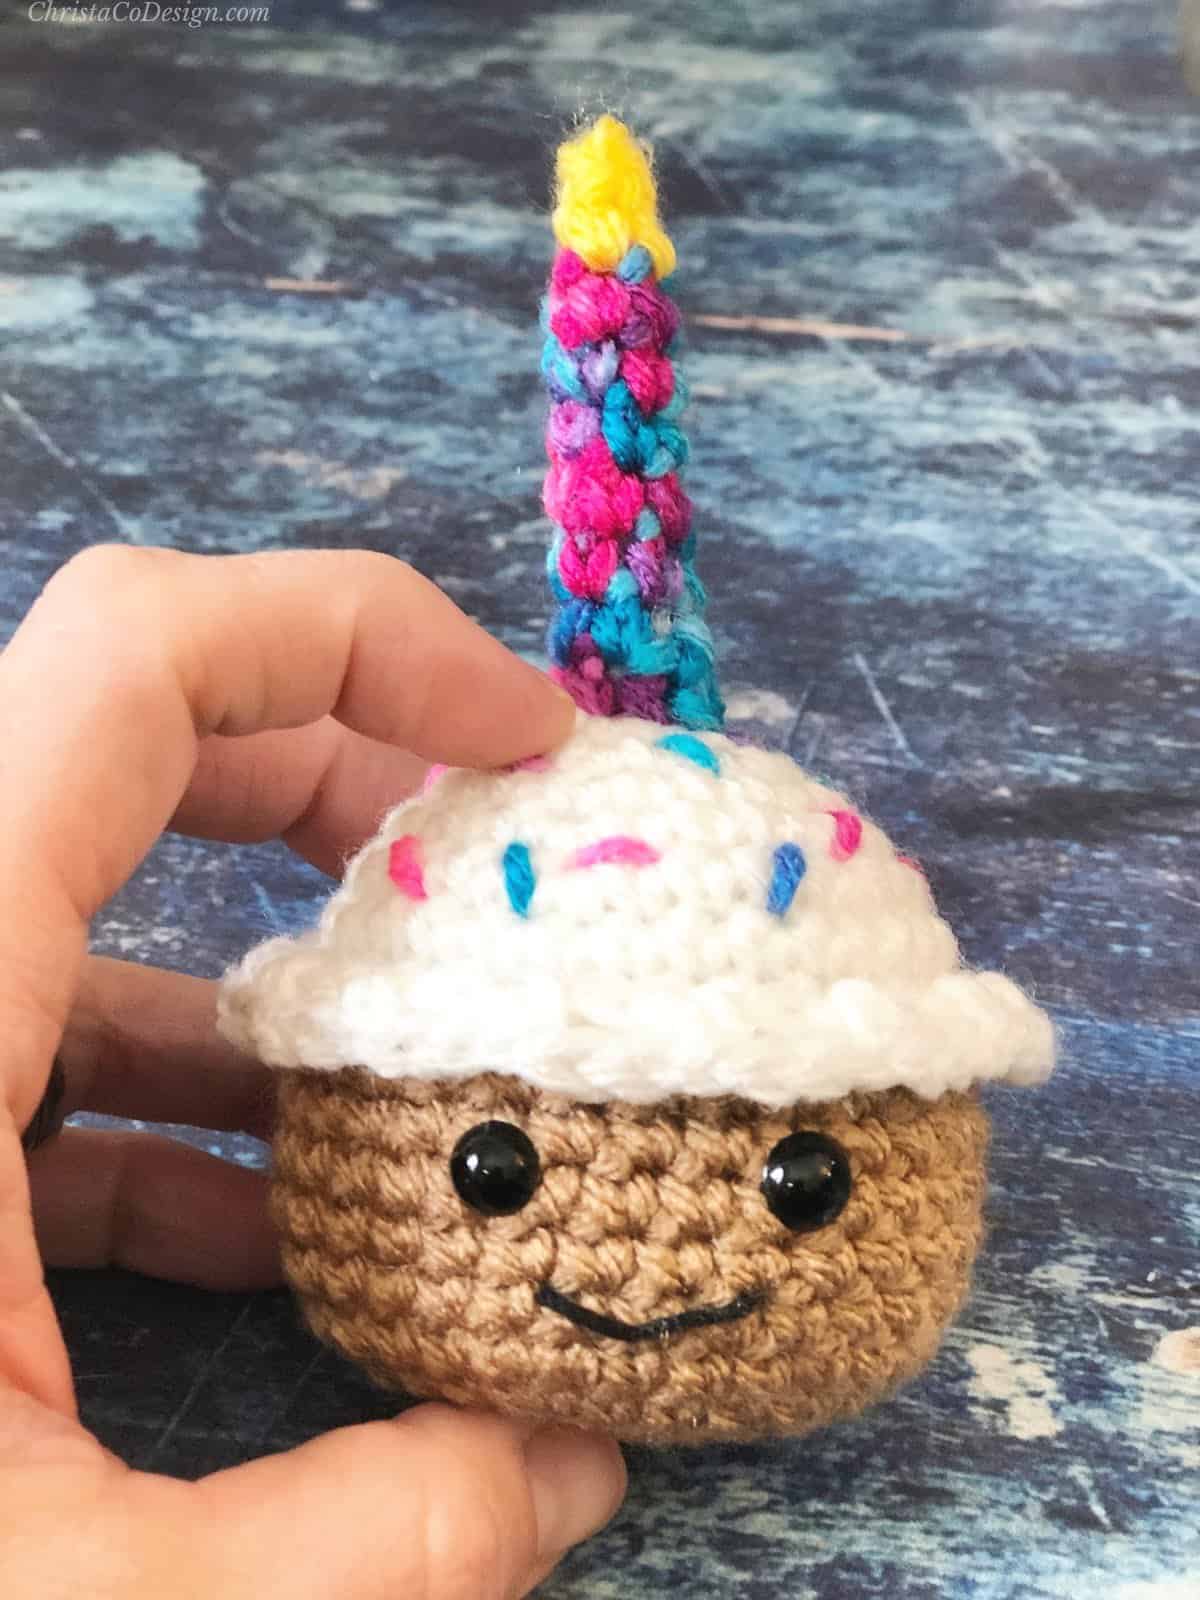 Crochet cupcake held in hand to show size.